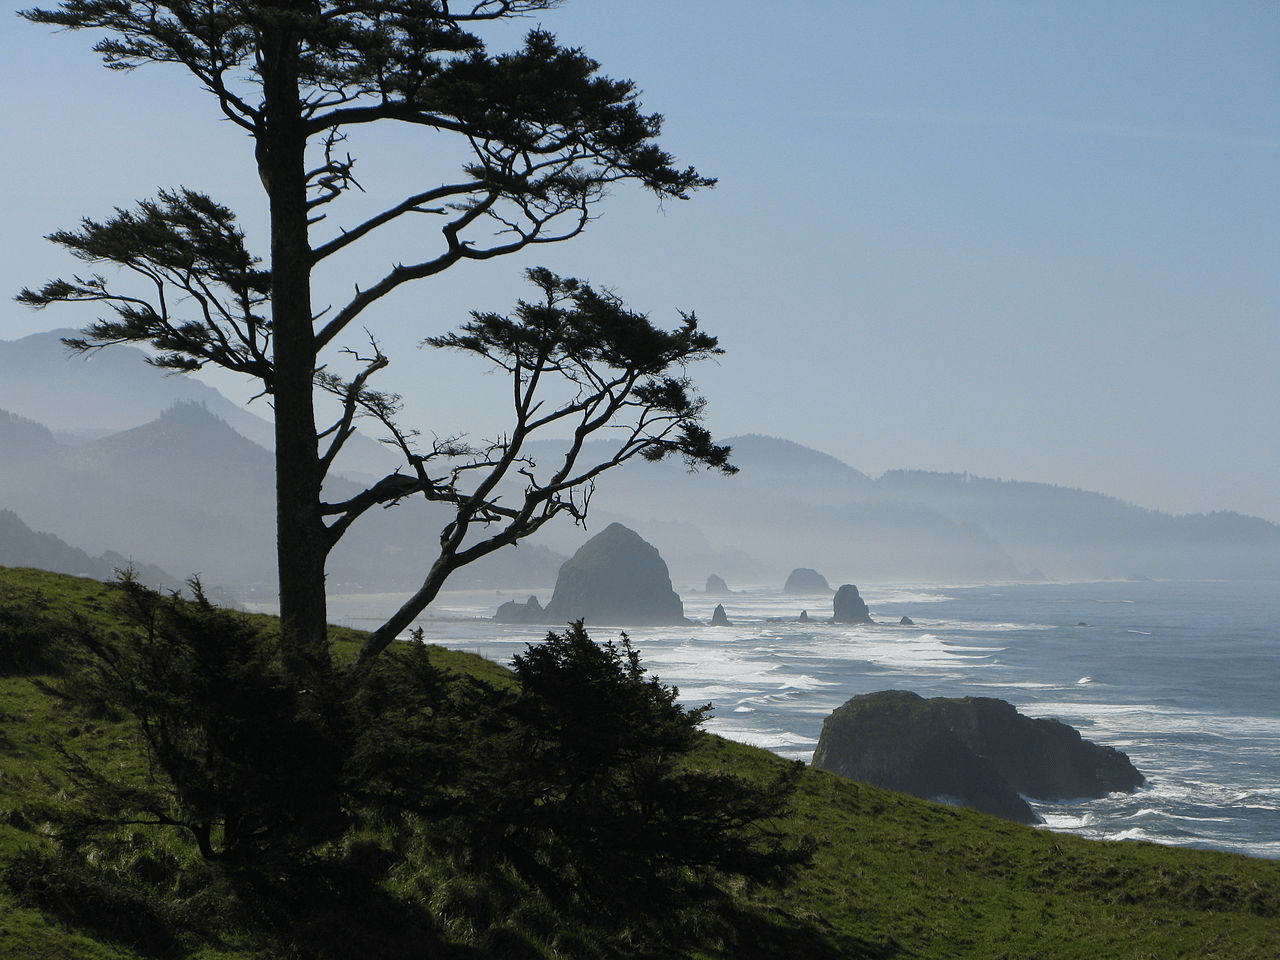 View of the Ecola State Park